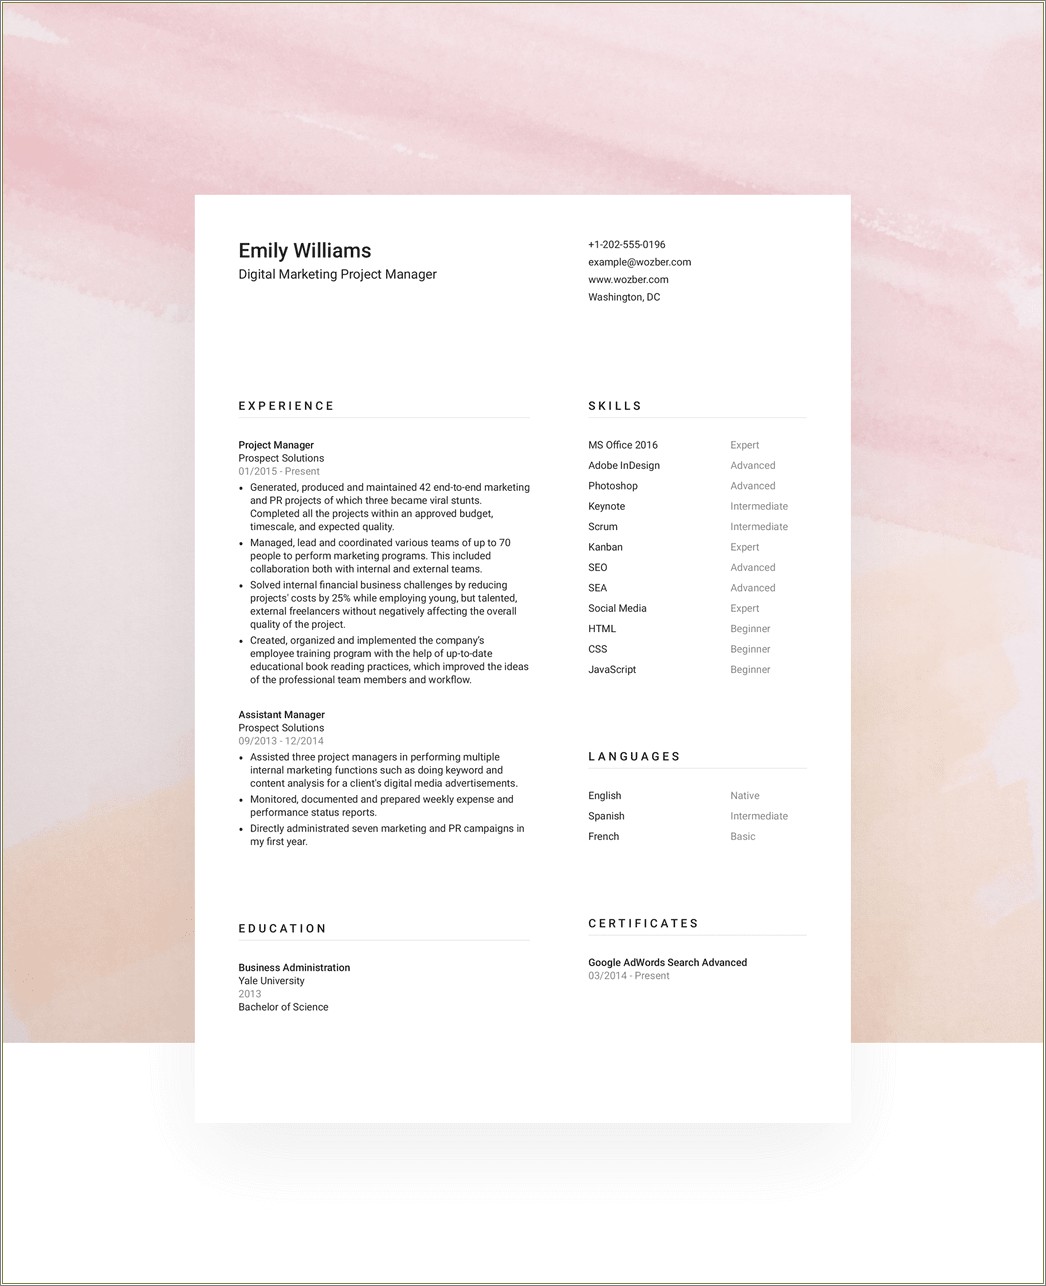 Resume Example For Sales Assistant For Magazine Company